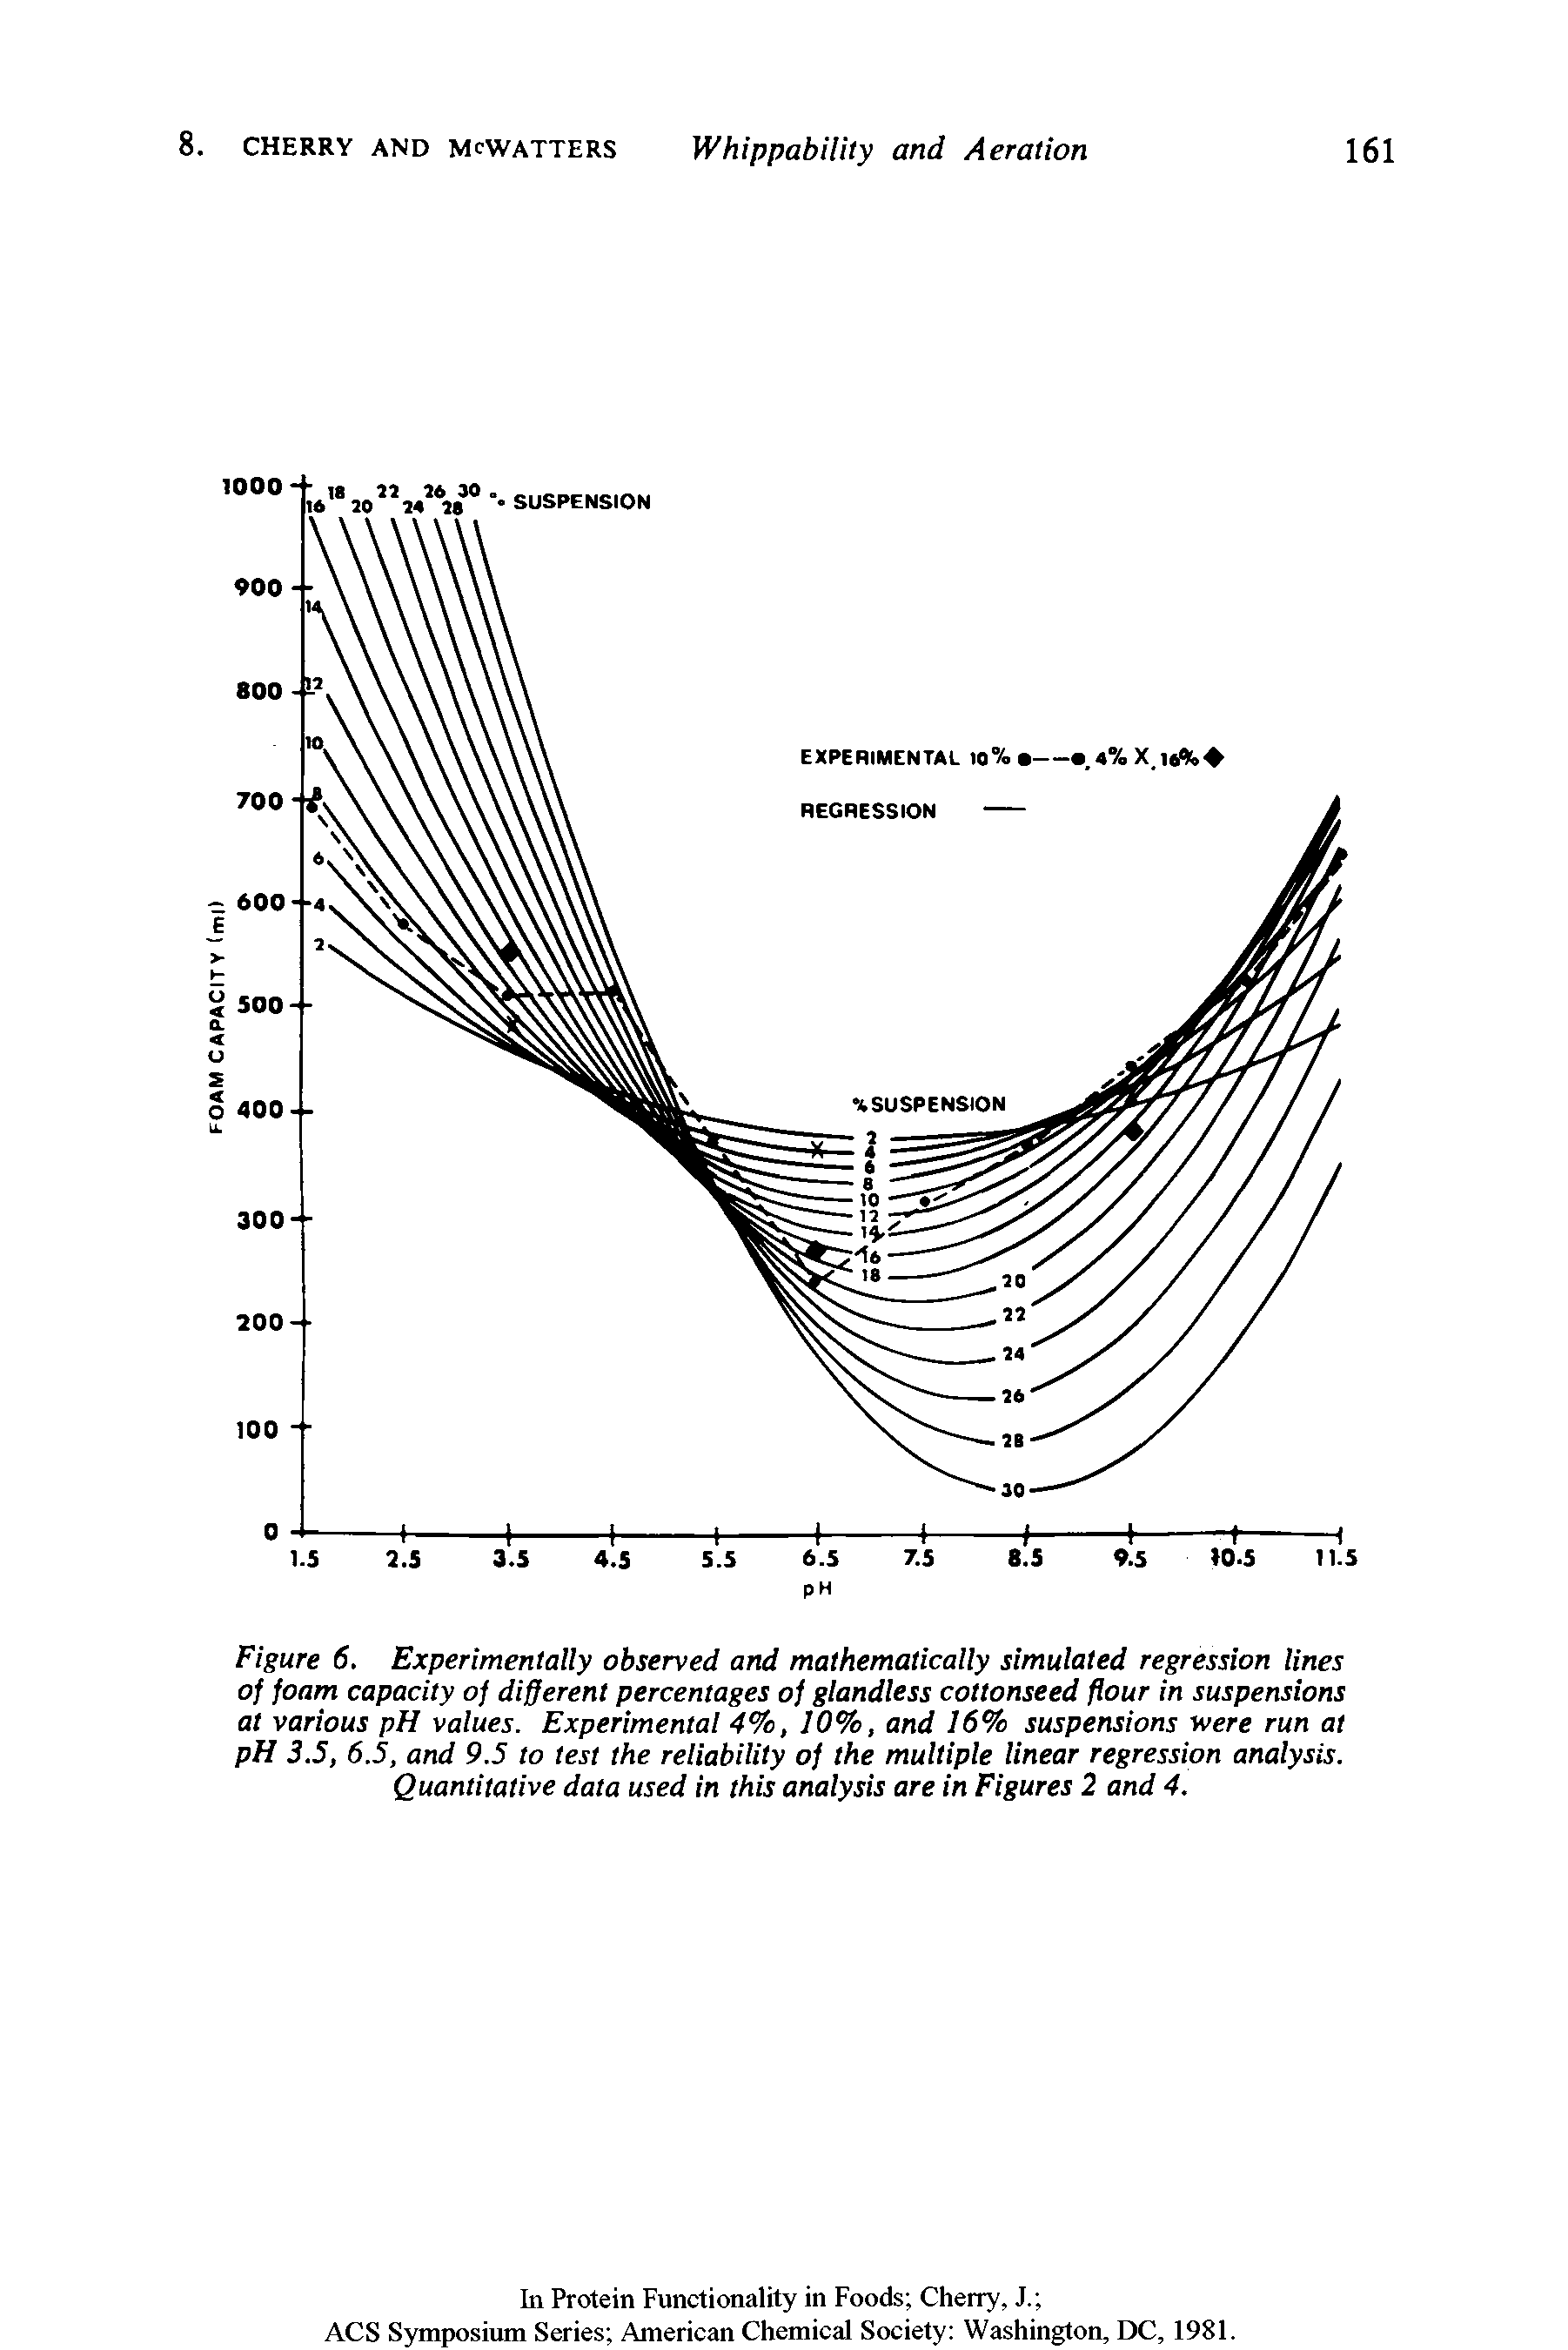 Figure 6. Experimentally observed and mathematically simulated regression lines of foam capacity of different percentages of glandless cottonseed flour in suspensions at various pH values. Experimental 4%, 10%, and 16% suspensions were run at pH 3.5, 6.5, and 9.5 to test the reliability of the multiple linear regression analysis. Quantitative data used in this analysis are in Figures 2 and 4.